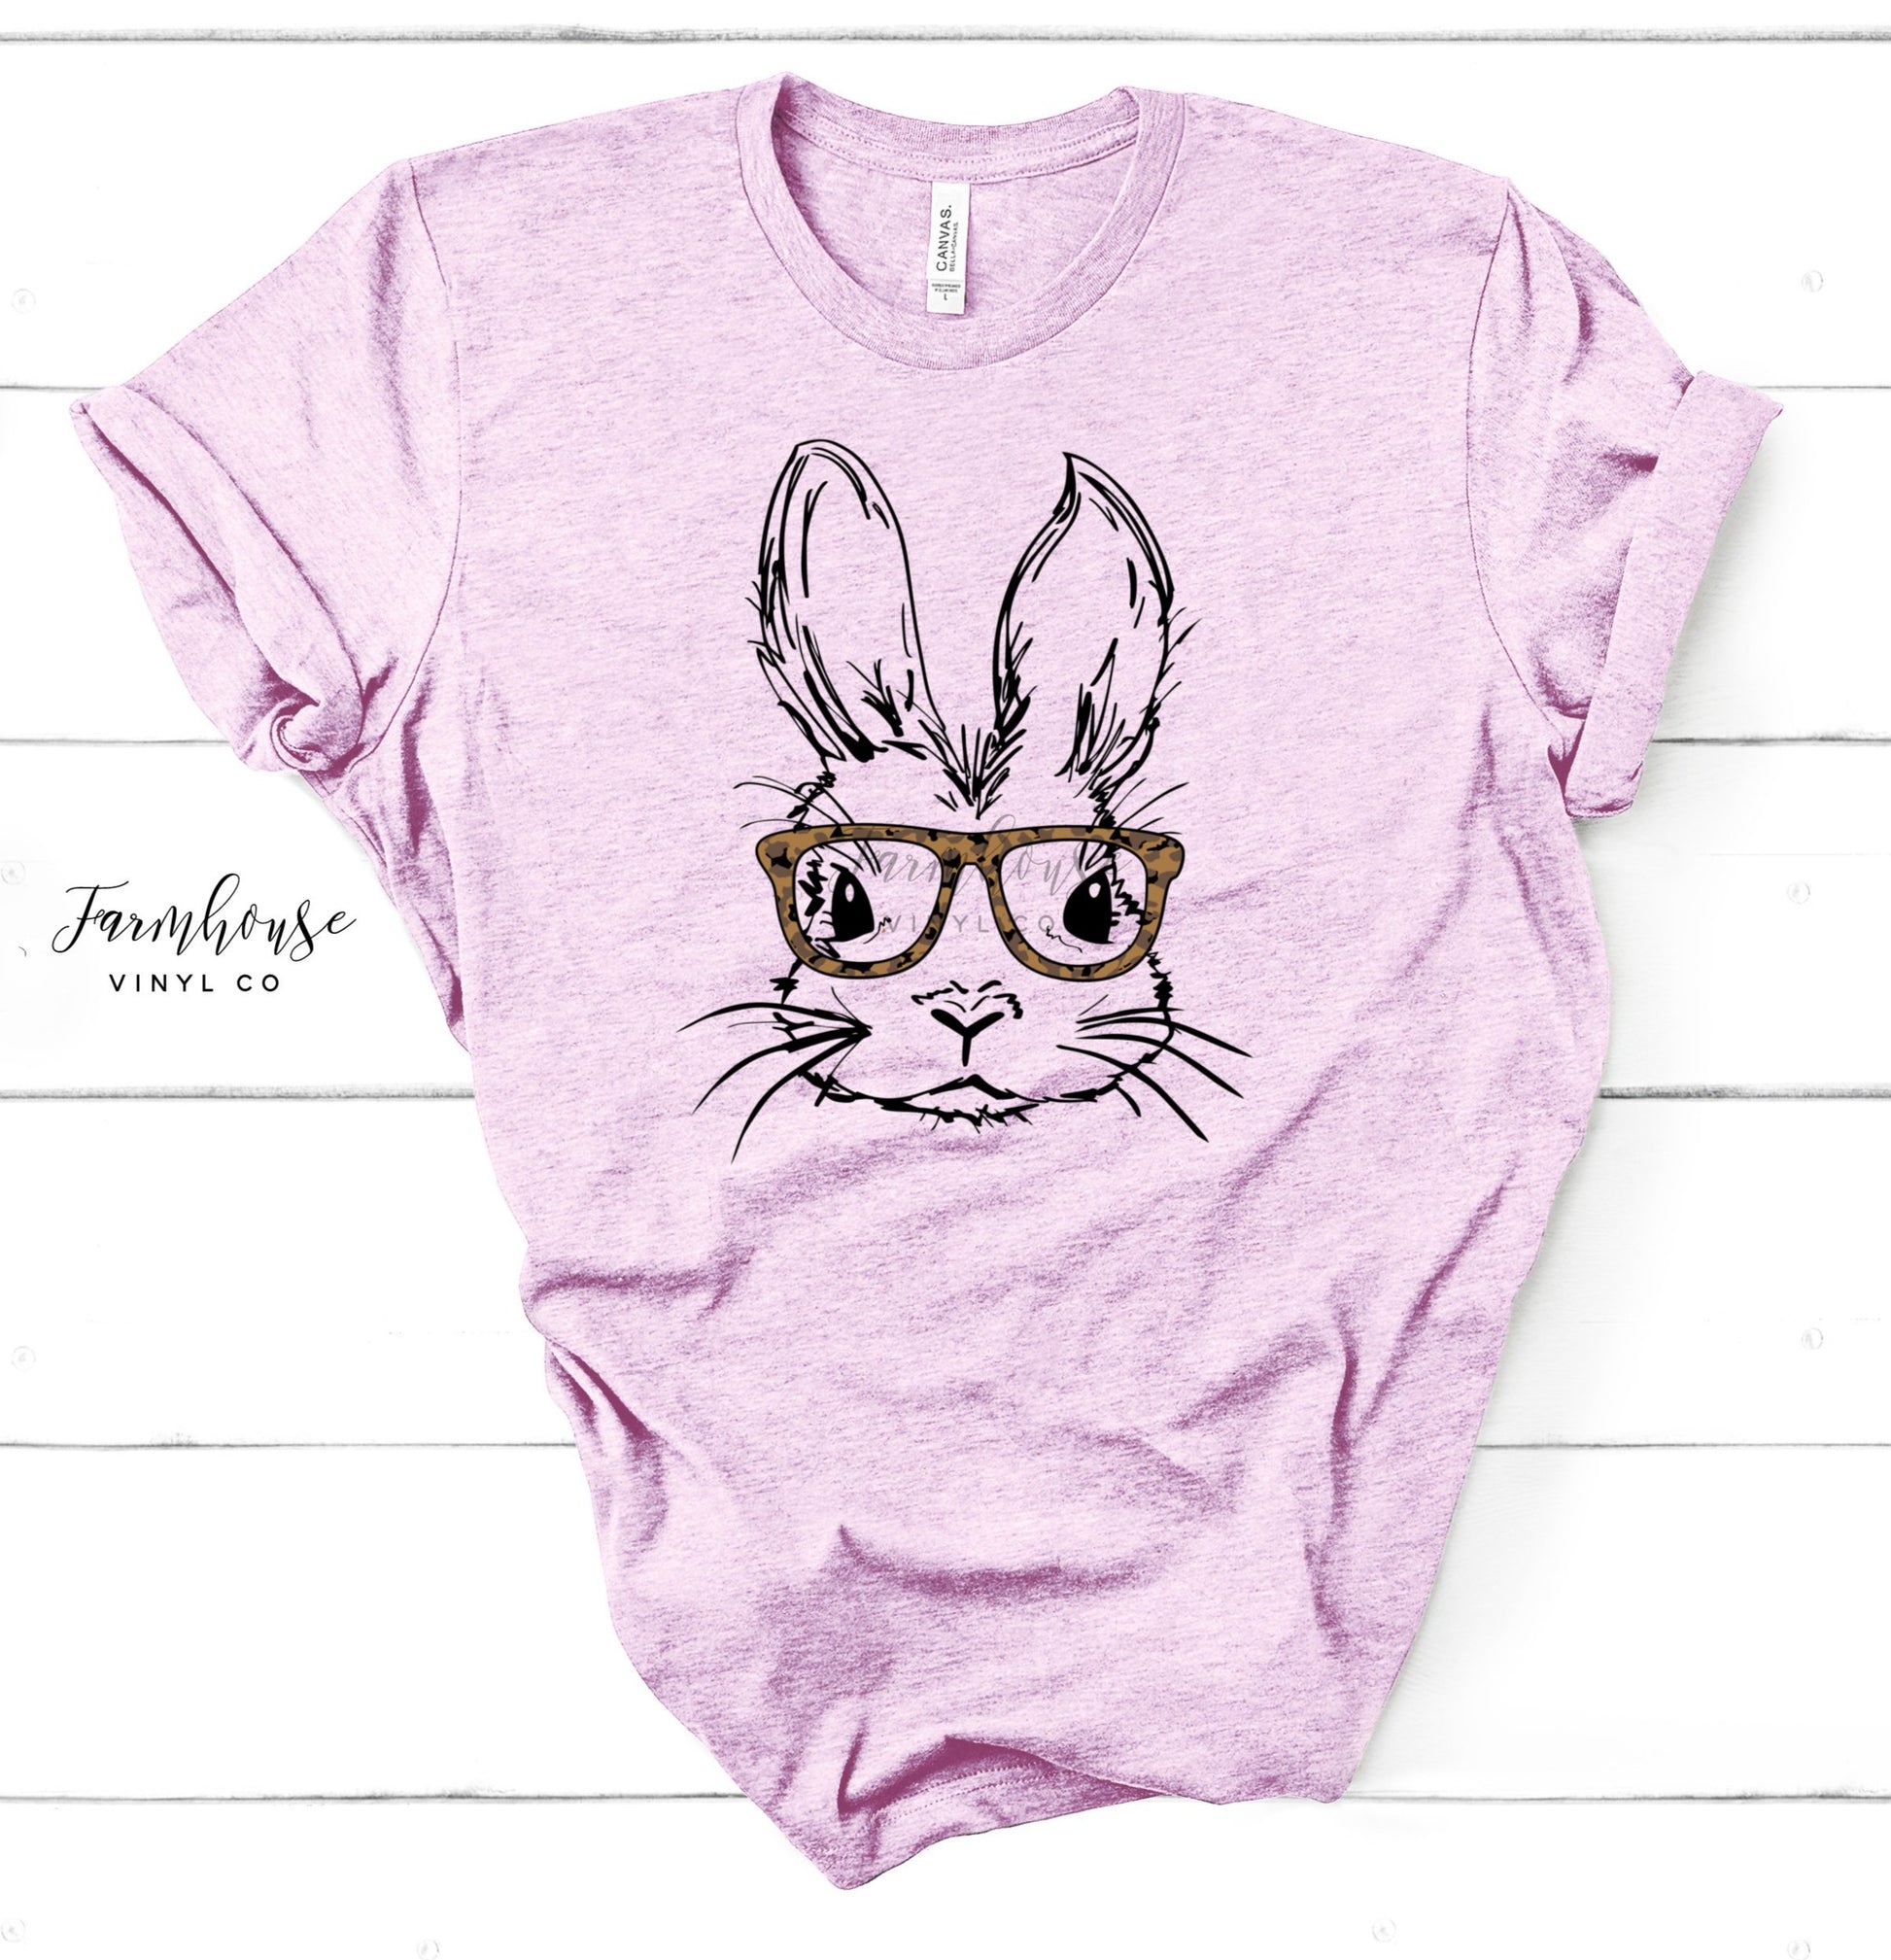 Hipster Easter Bunny with Glasses Shirt - Farmhouse Vinyl Co